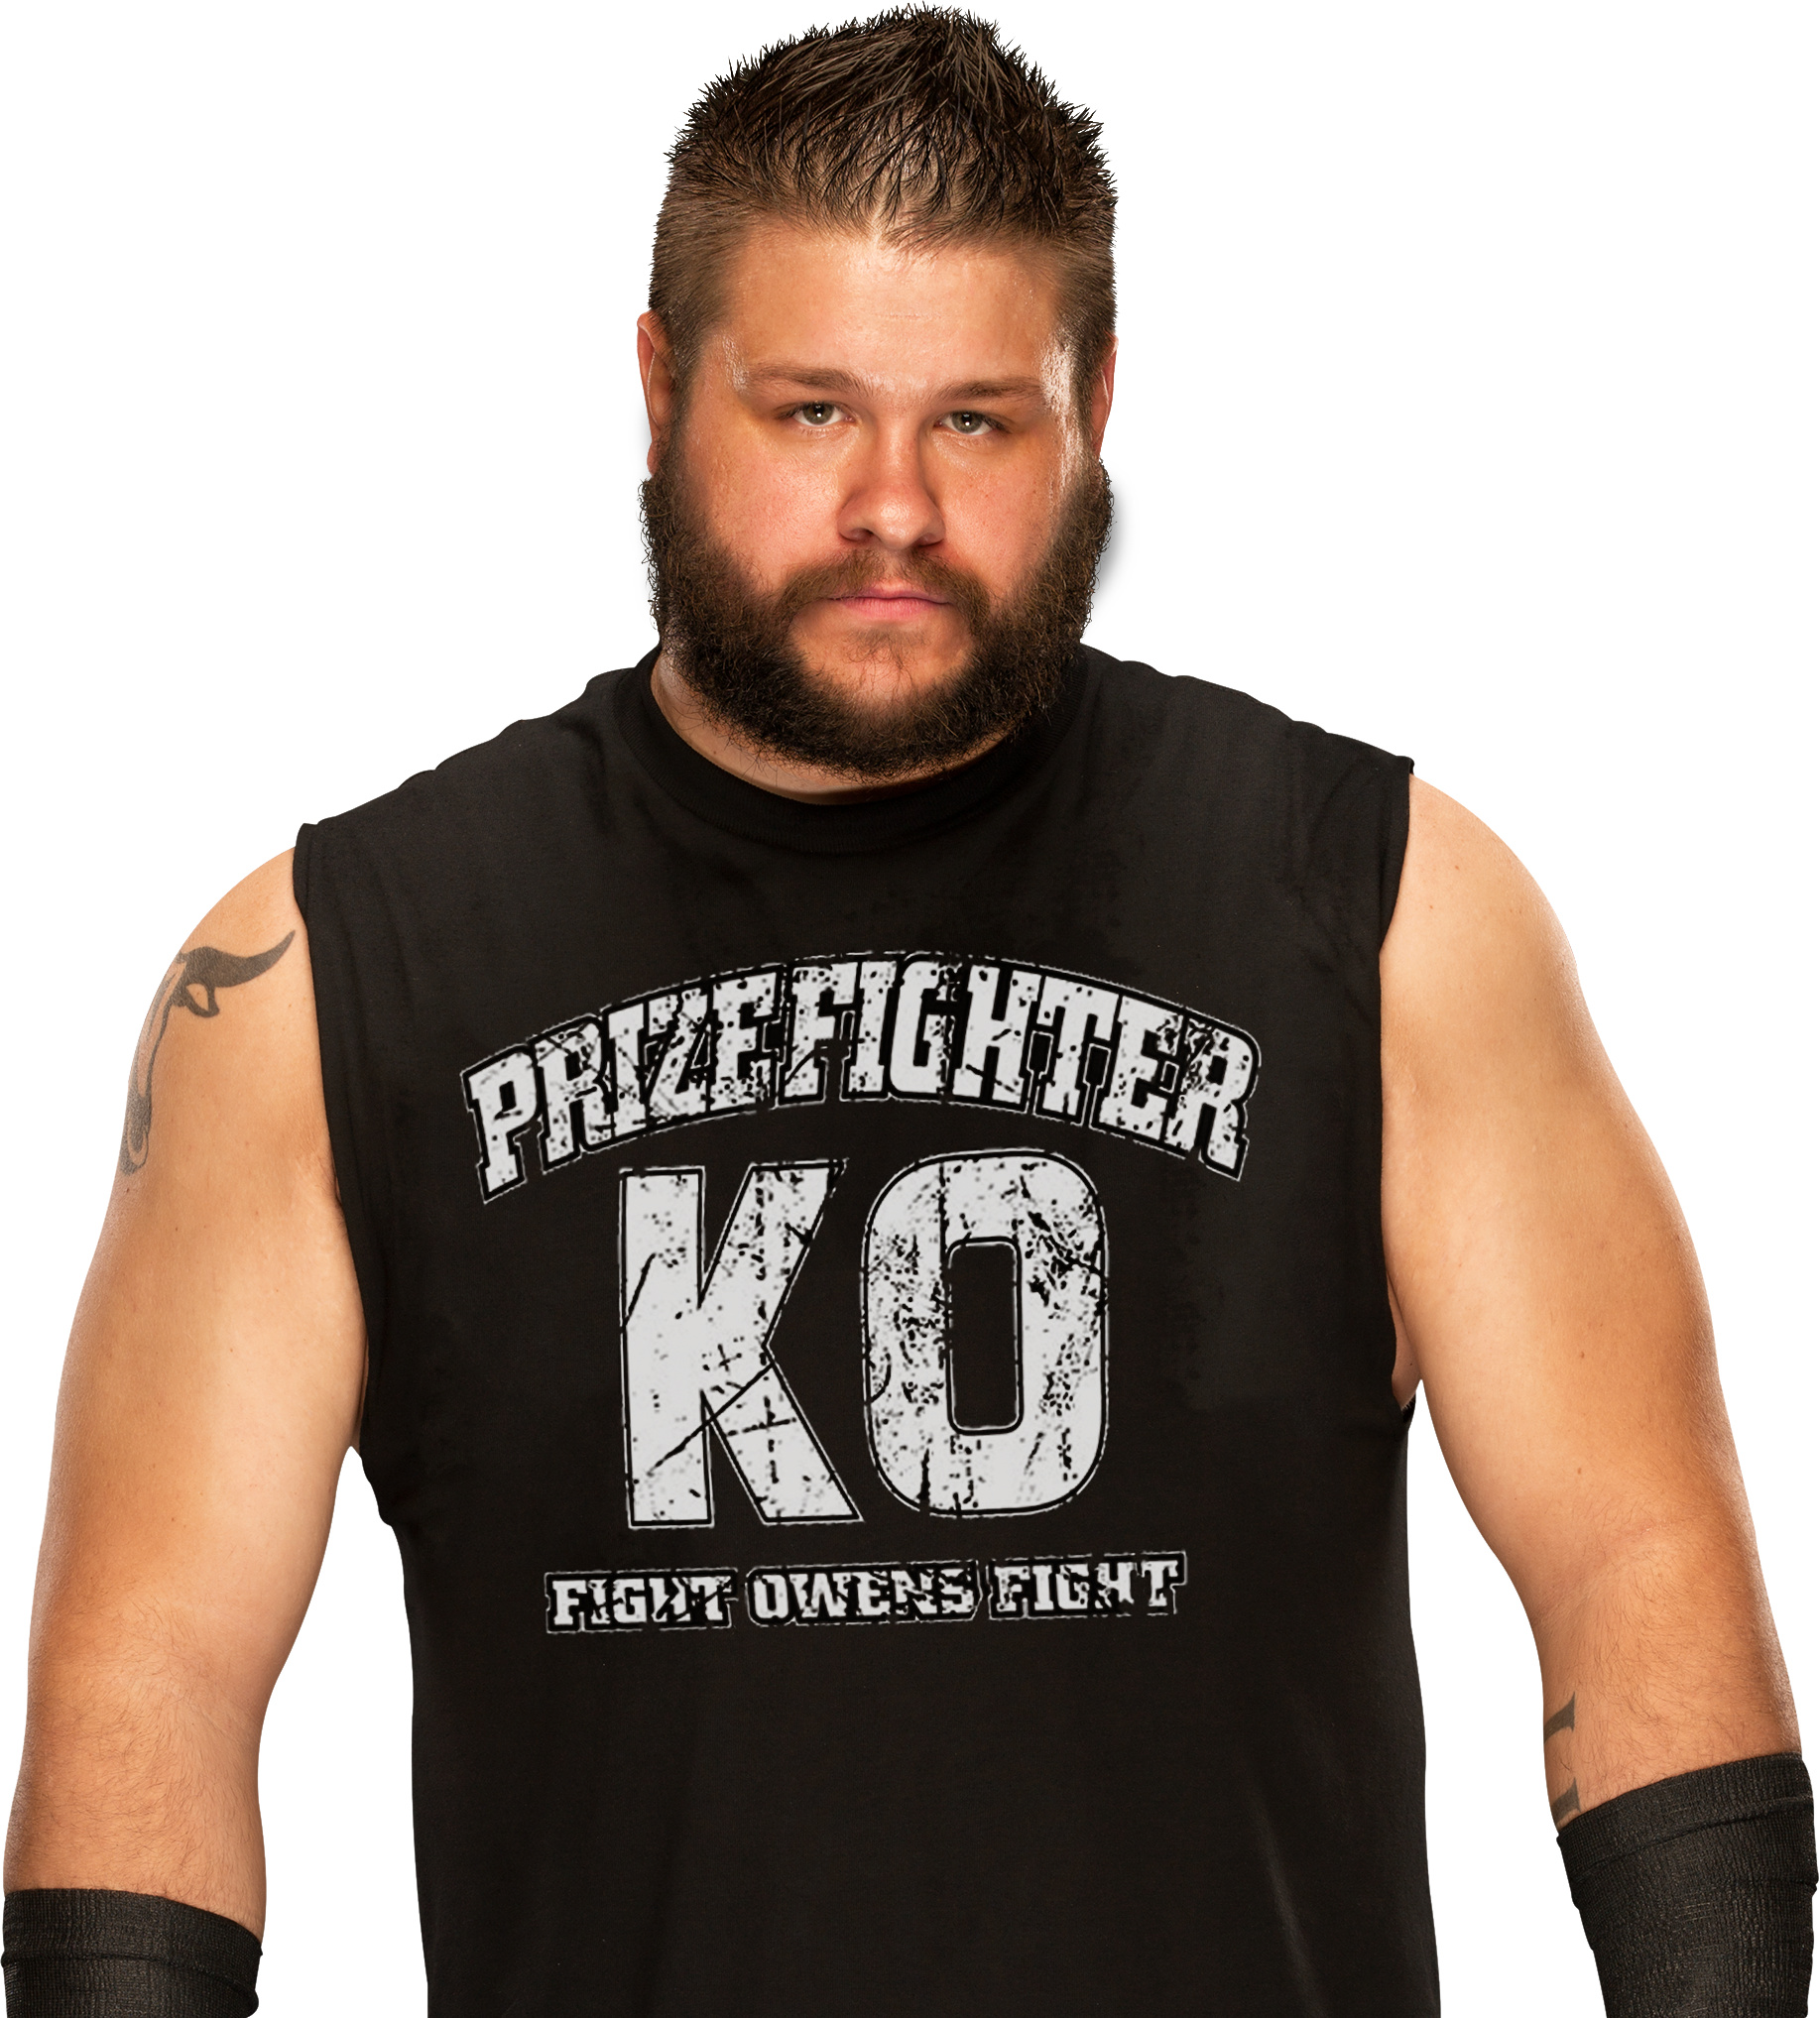 Kevin Owens Wallpapers (19+ images inside)